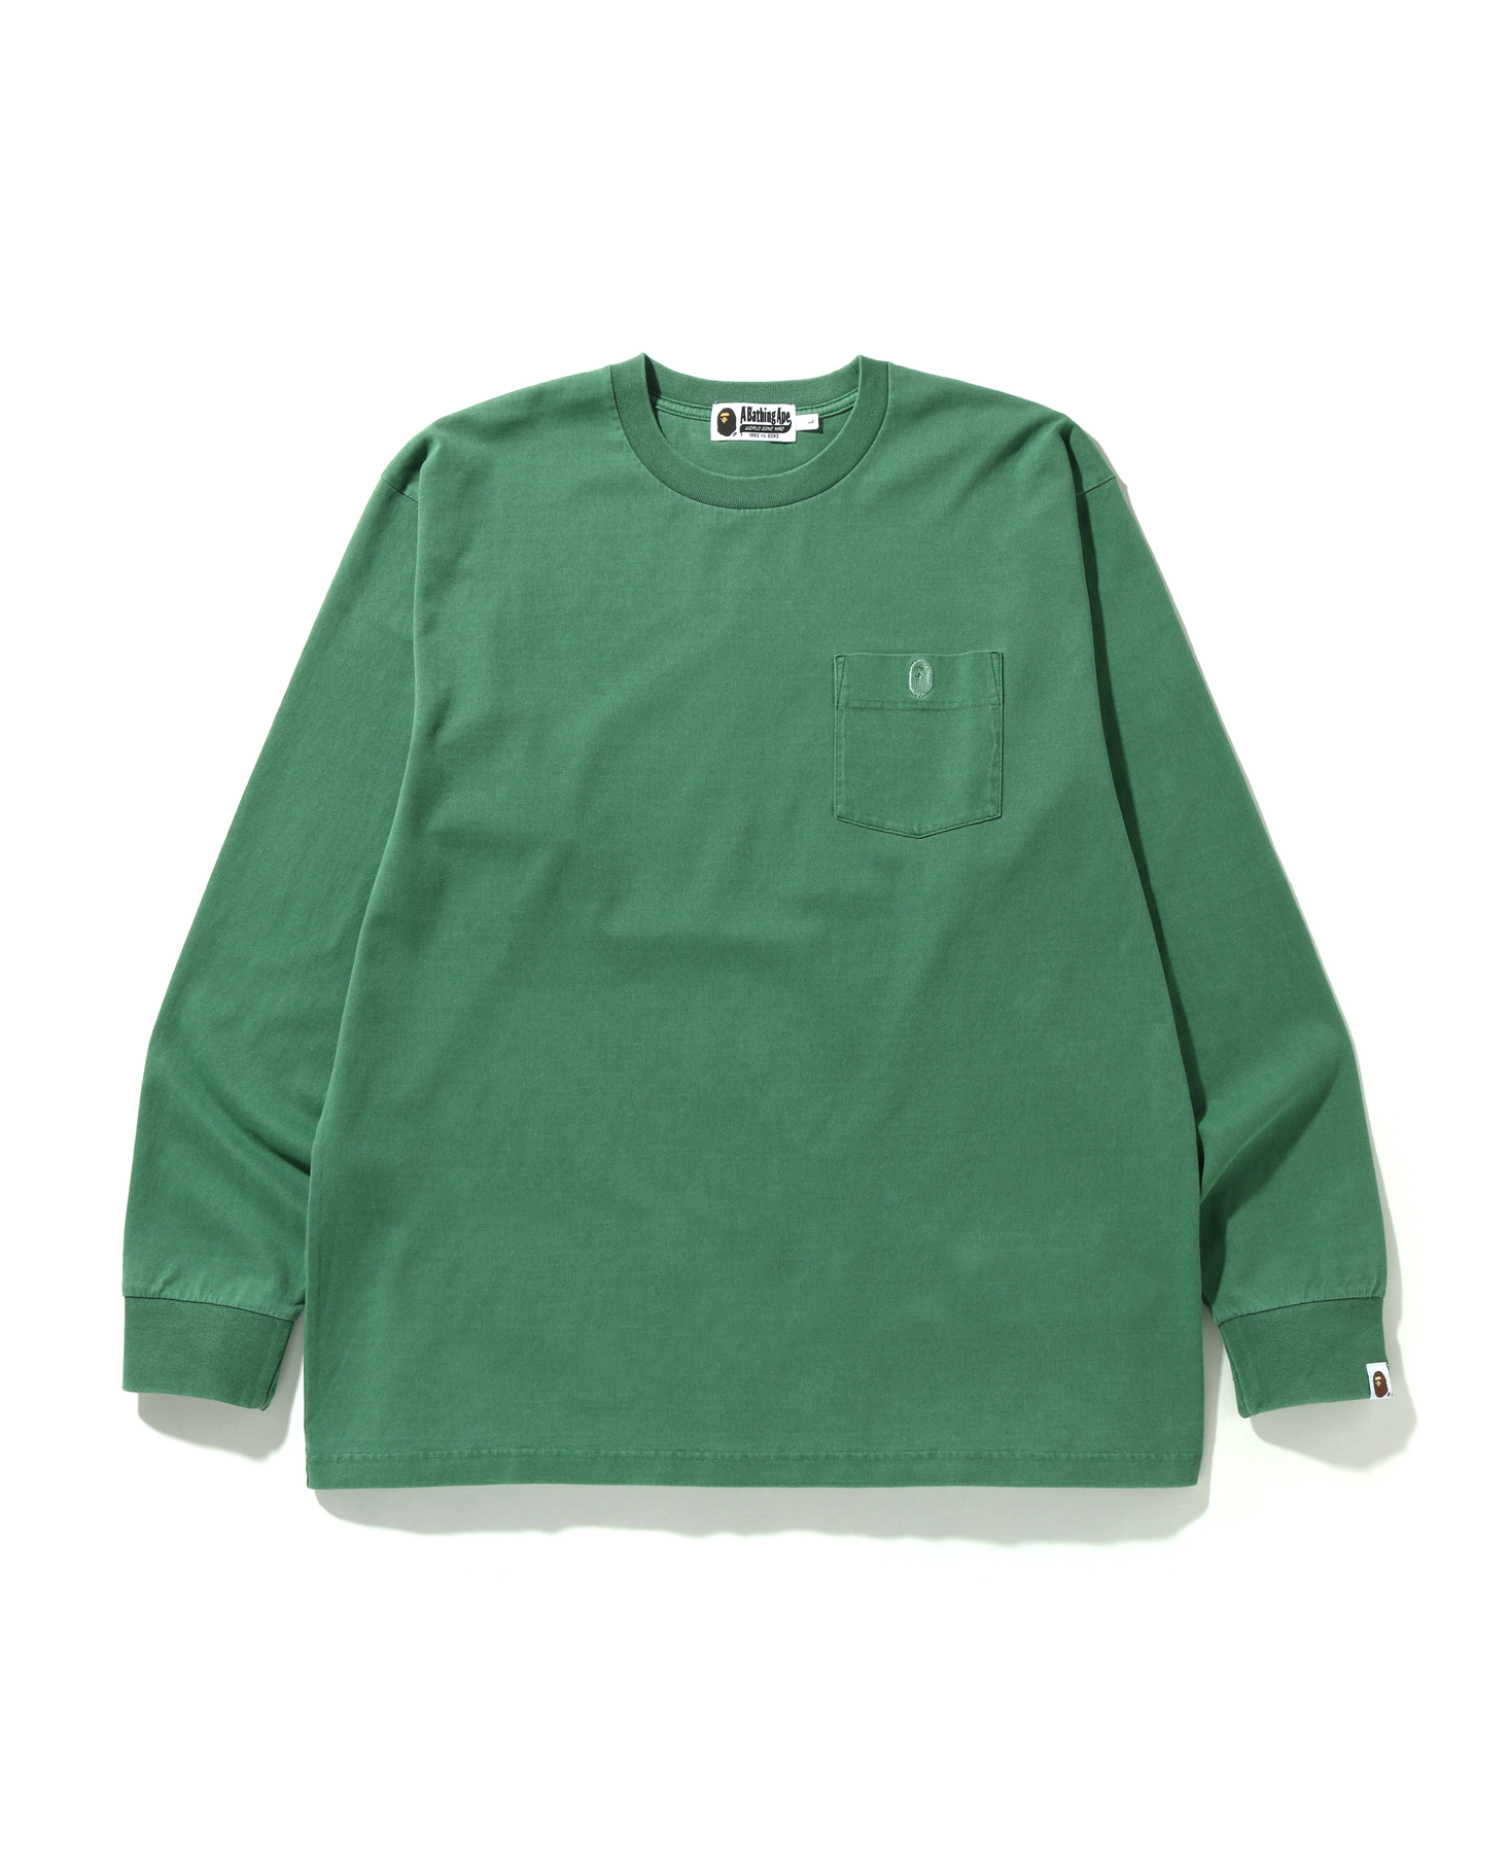 Shop Overdye One Point Pocket Relaxed Fit L/S Tee Online | BAPE